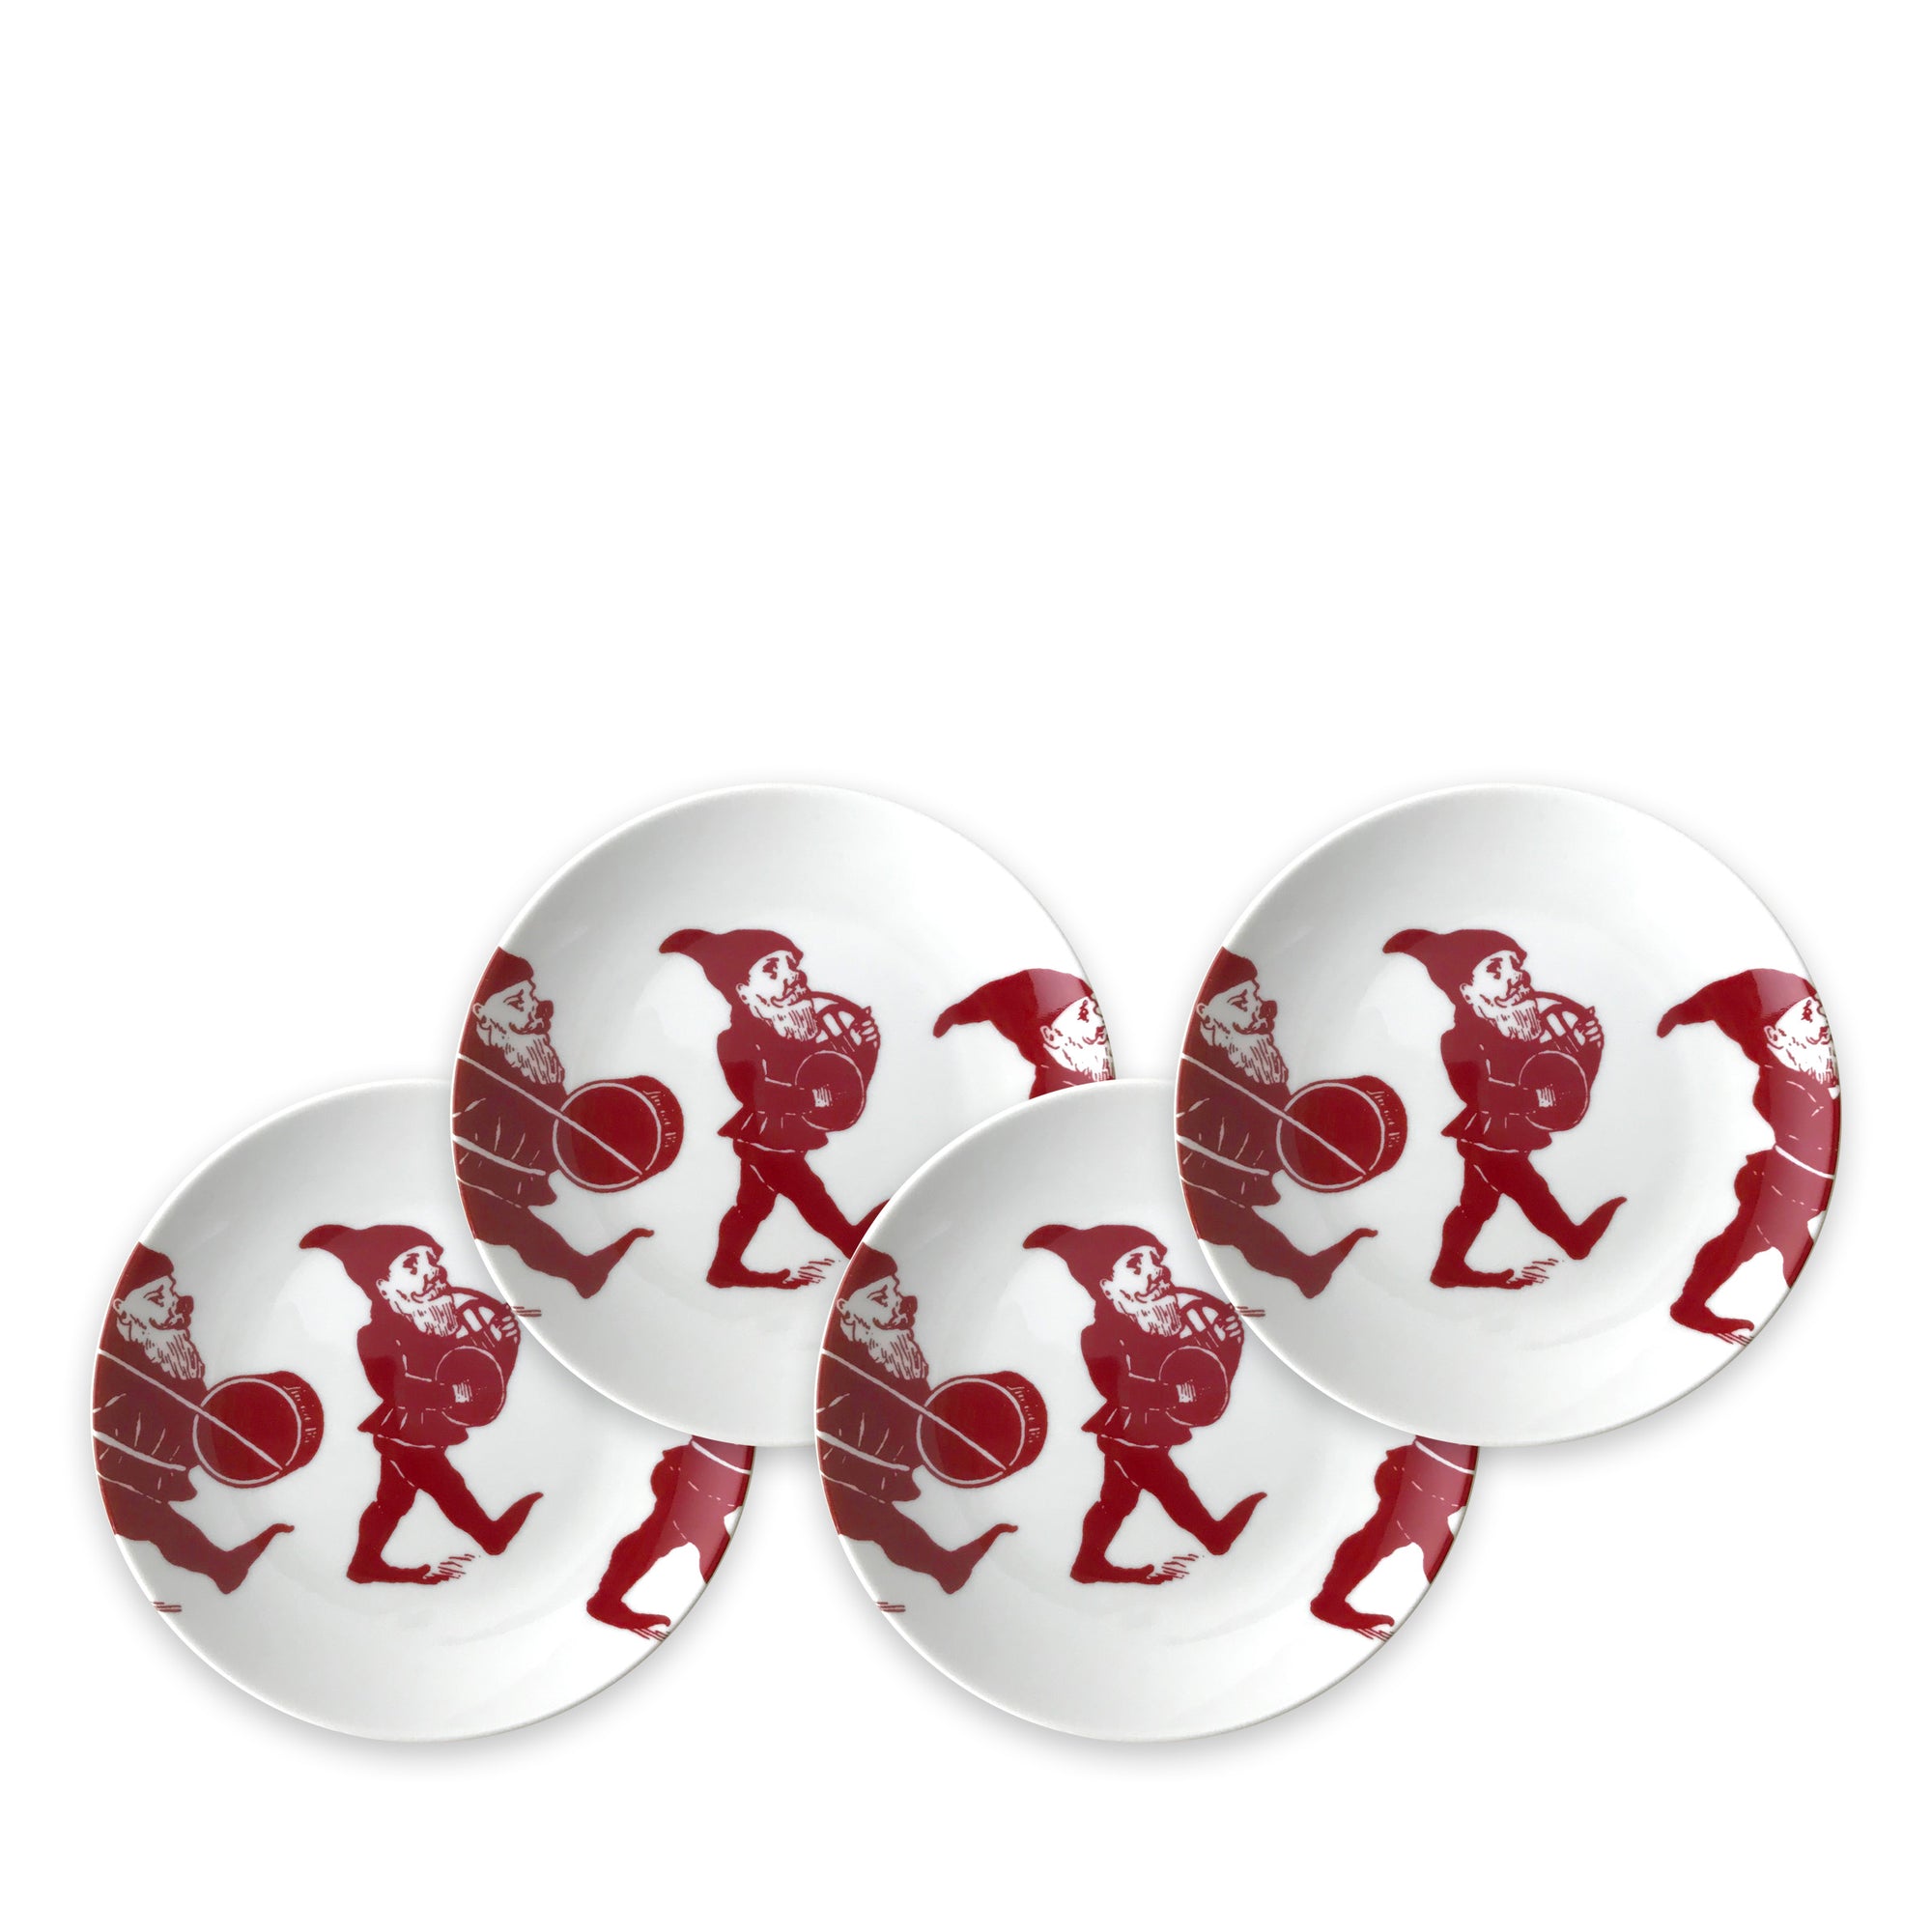 Four white plates, part of an heirloom-quality dinnerware holiday collection, each feature an illustration of a red gnome holding a drum. They are called Elves Small Plates by Caskata Artisanal Home.